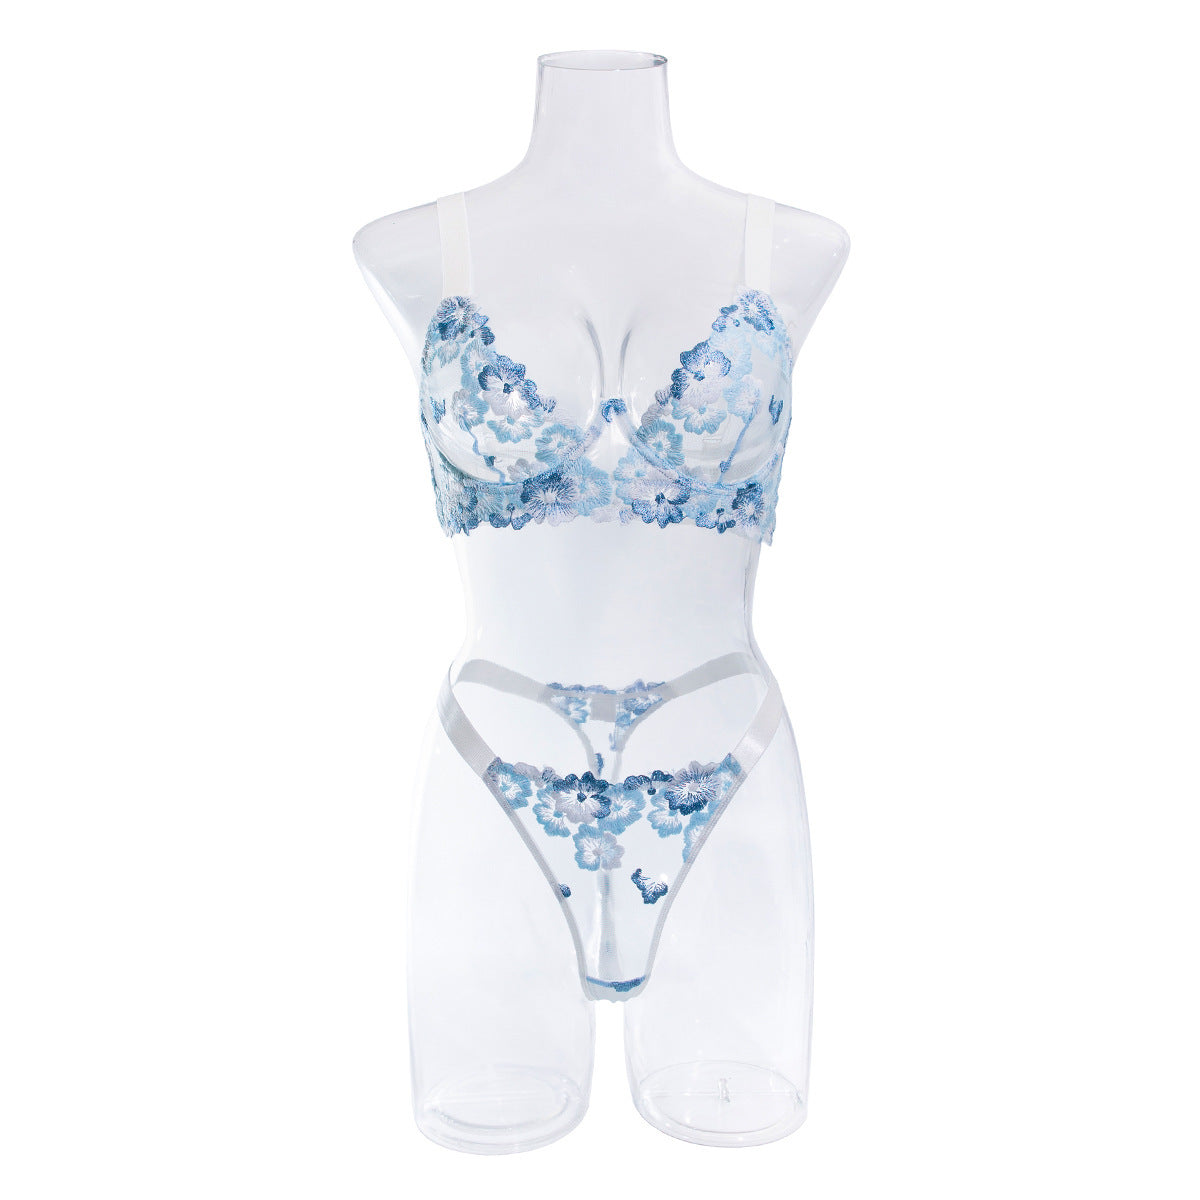 a mannequin wearing a blue and white bra and panties